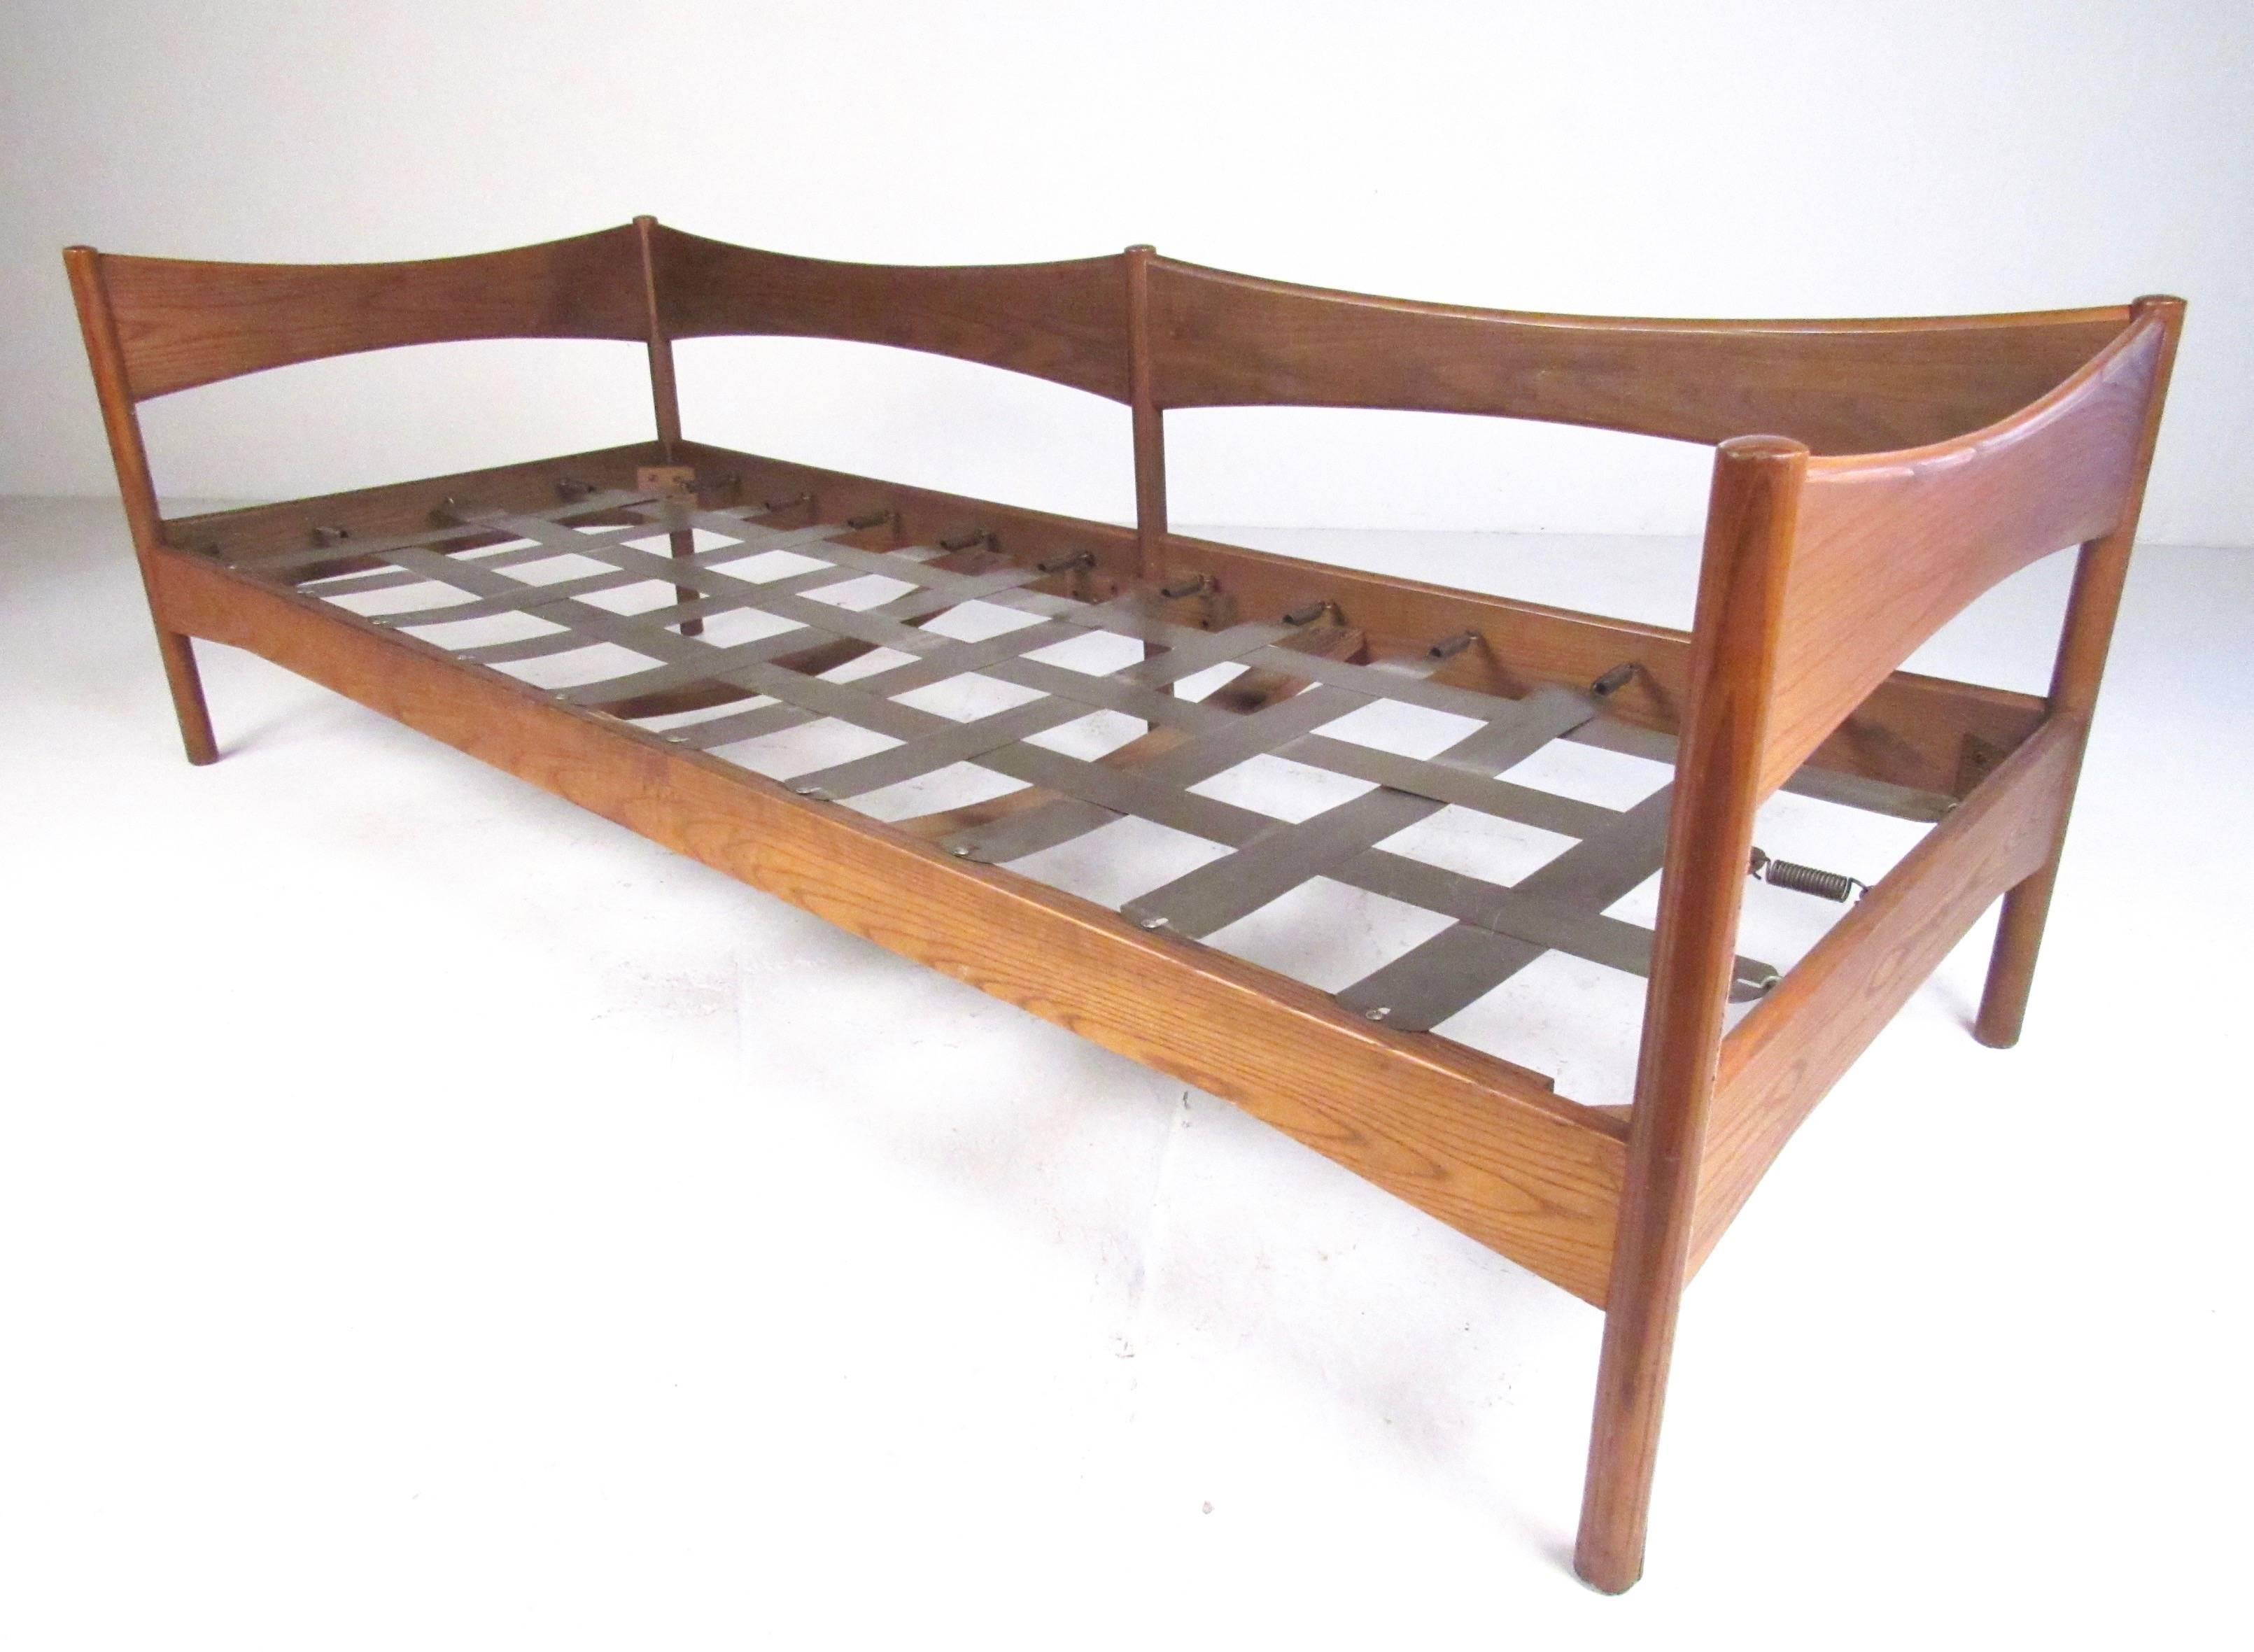 This uniquely shaped Mid-Century Modern daybed features sturdy oak and metal construction, with unique sculptural details. Wide woven metal seating area allows for a spacious upholstered cushion and can be used as a daybed or upholstered with back